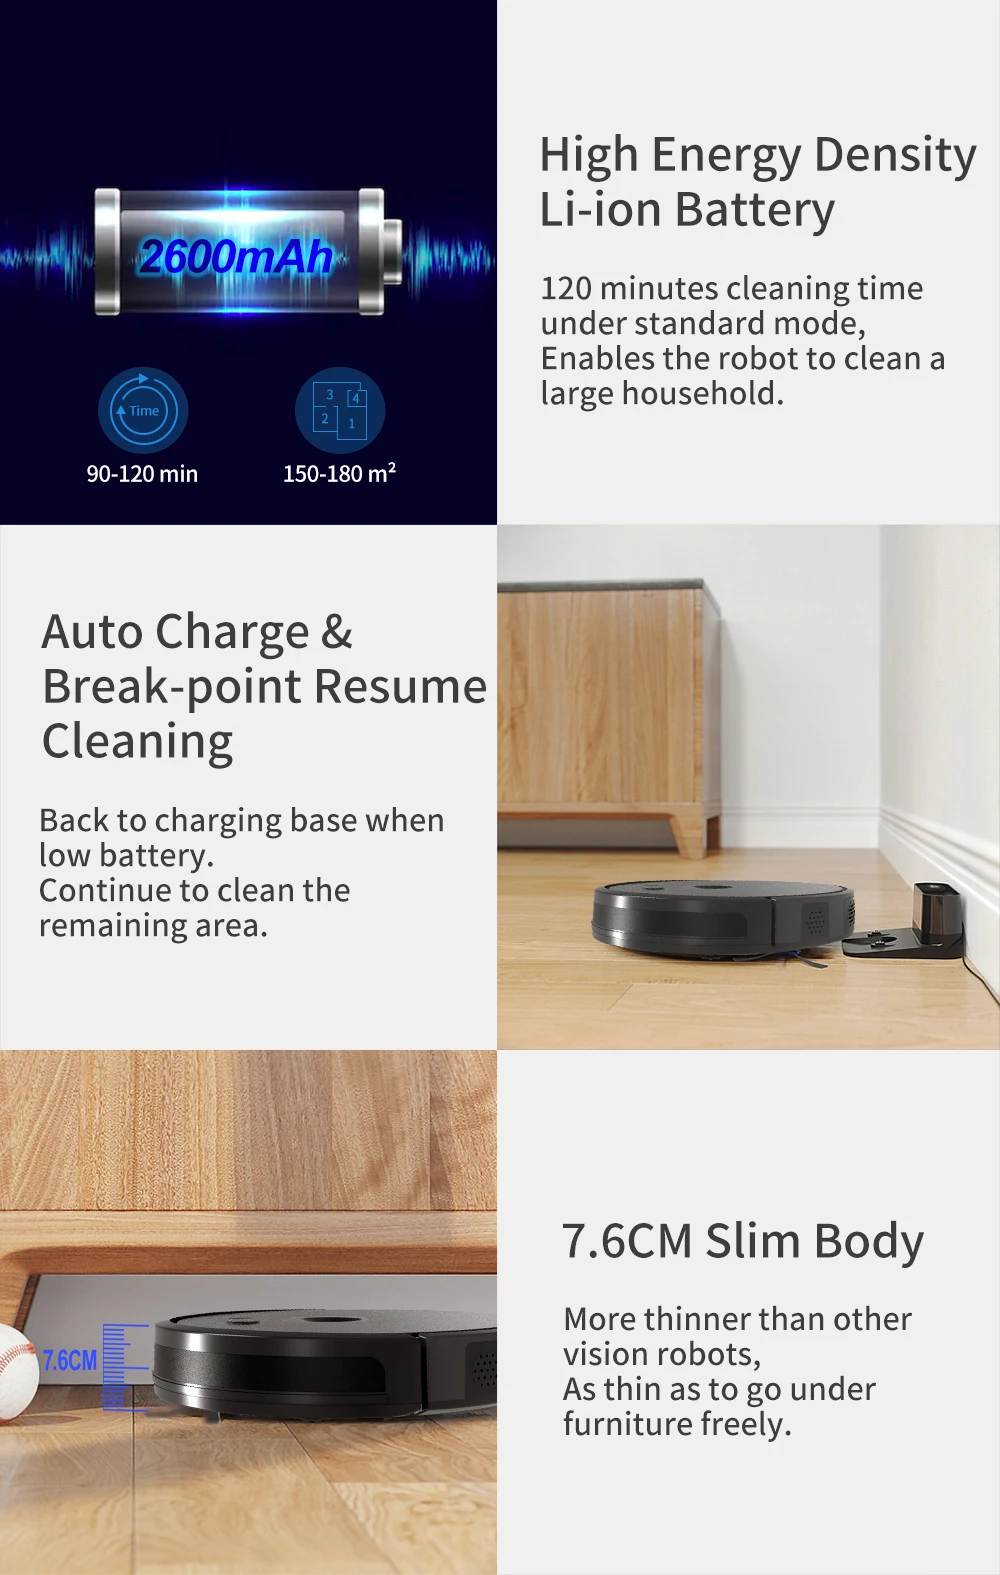 ABIR X6 Robot Vacuum Cleaner, Visual Navigation,APP Virtual Barrier,Breakpoint Continuous Cleaning,Draw Cleaning Area On Map